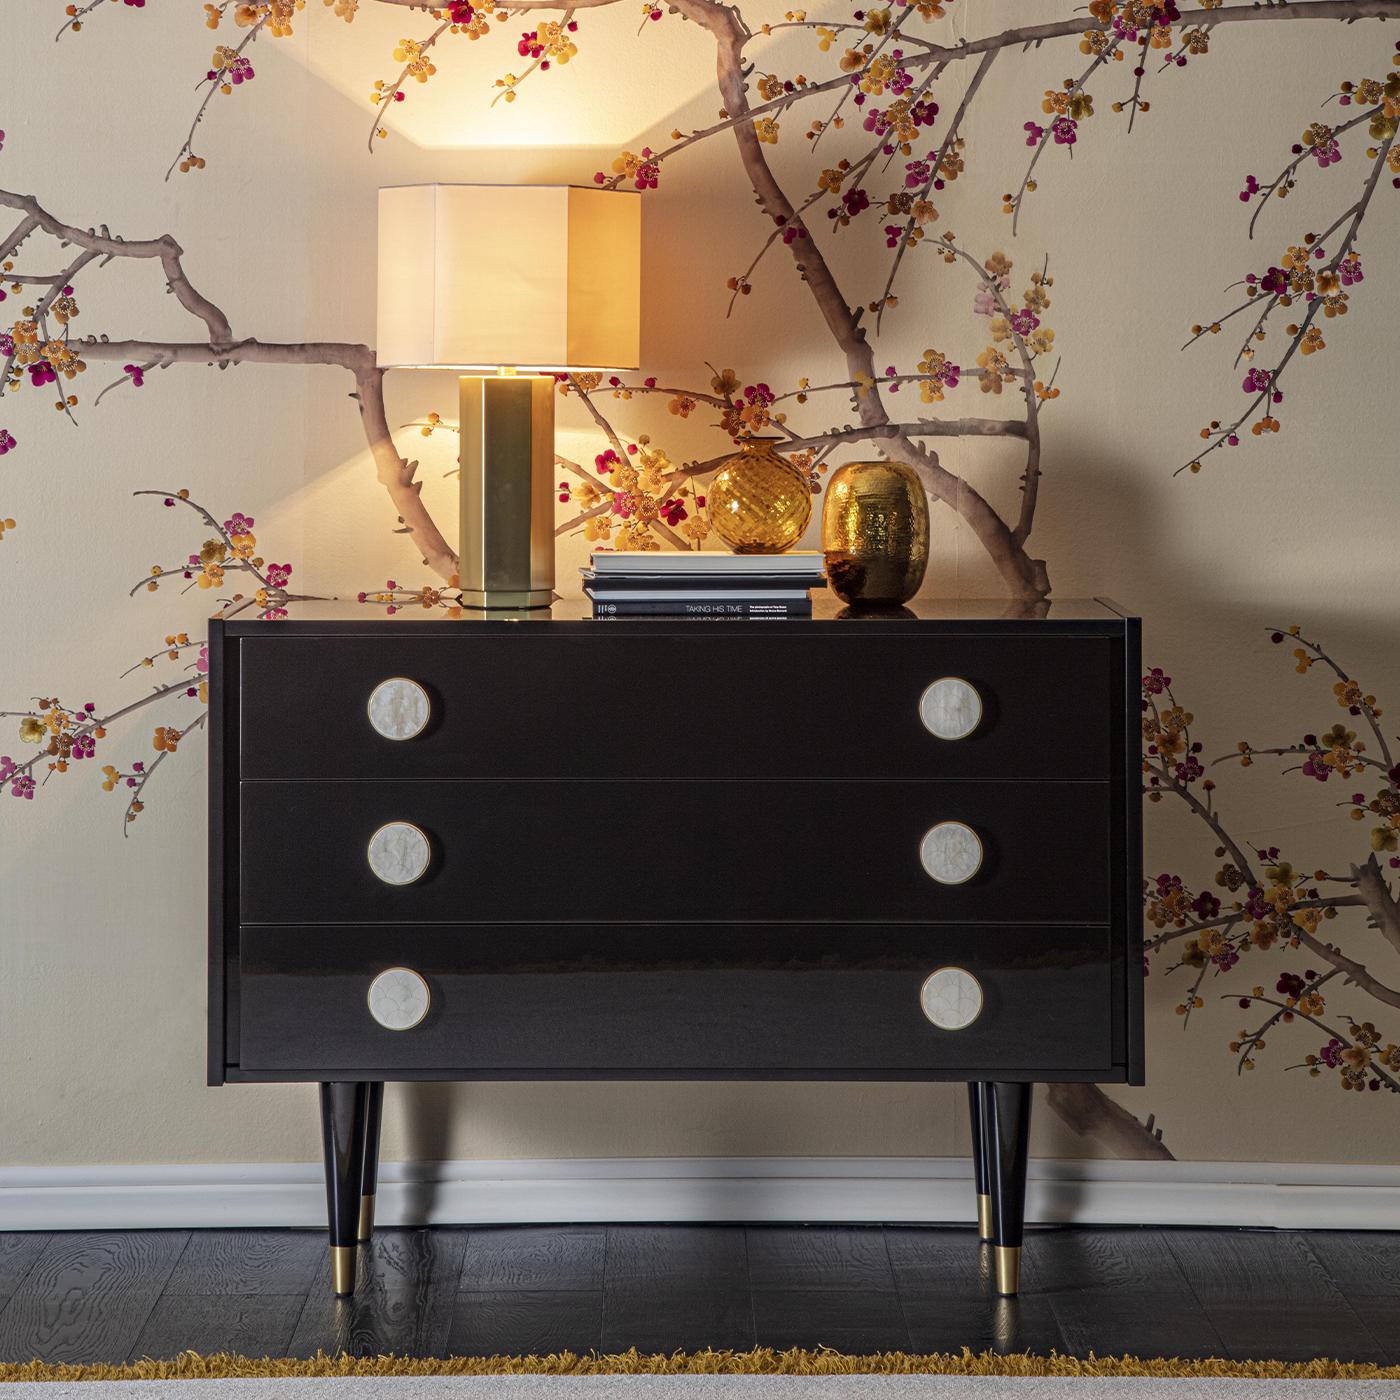 This statement-making wooden chest of drawers lacquered in glossy dark-brown exudes a bold character deriving from neat and generous volumes. Resting on tapered legs accented with satin brass feet, the storage unit is comprised of three ample